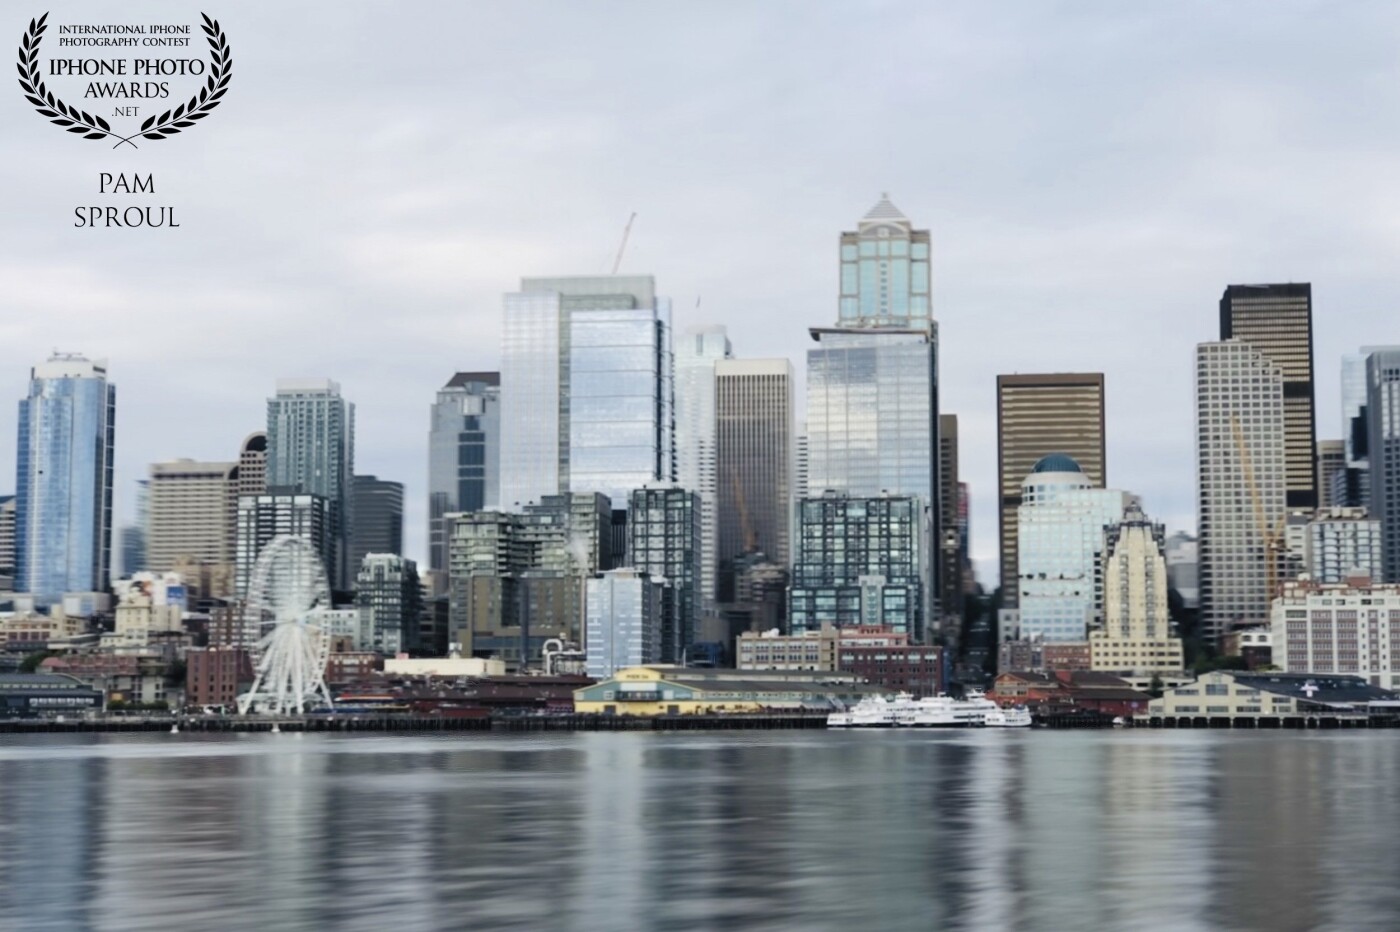 Seattle waterfront view from the stern of the Seattle-Bainbridge Island Ferry ~ slightly shimmering in the light <br />
“soft Seattle view” 2019